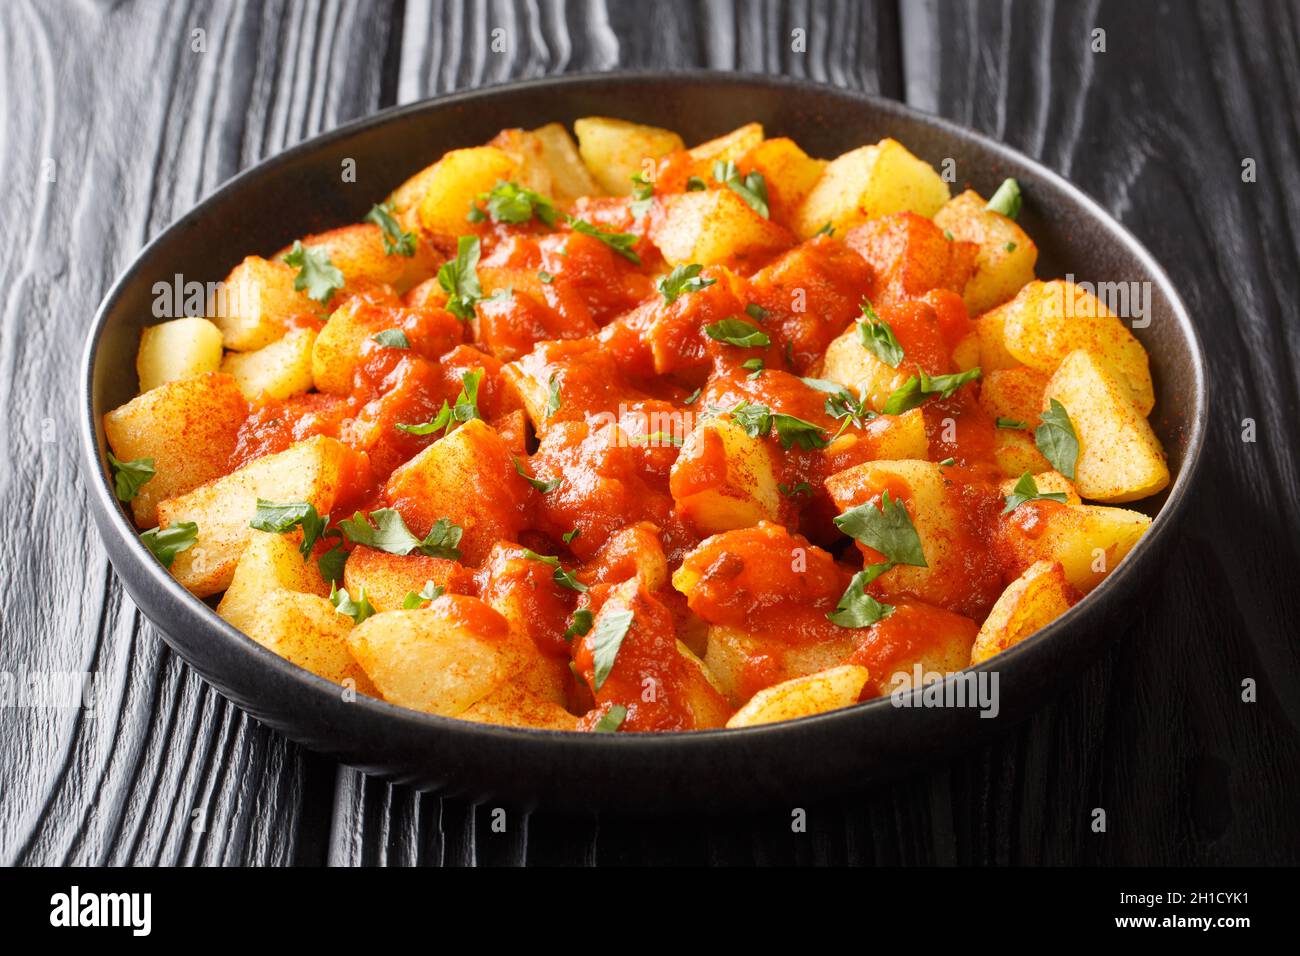 Patatas bravas or potatoes in bravas sauce are a classic Spanish tapas dish close up in the plate on the table. Horizontal Stock Photo